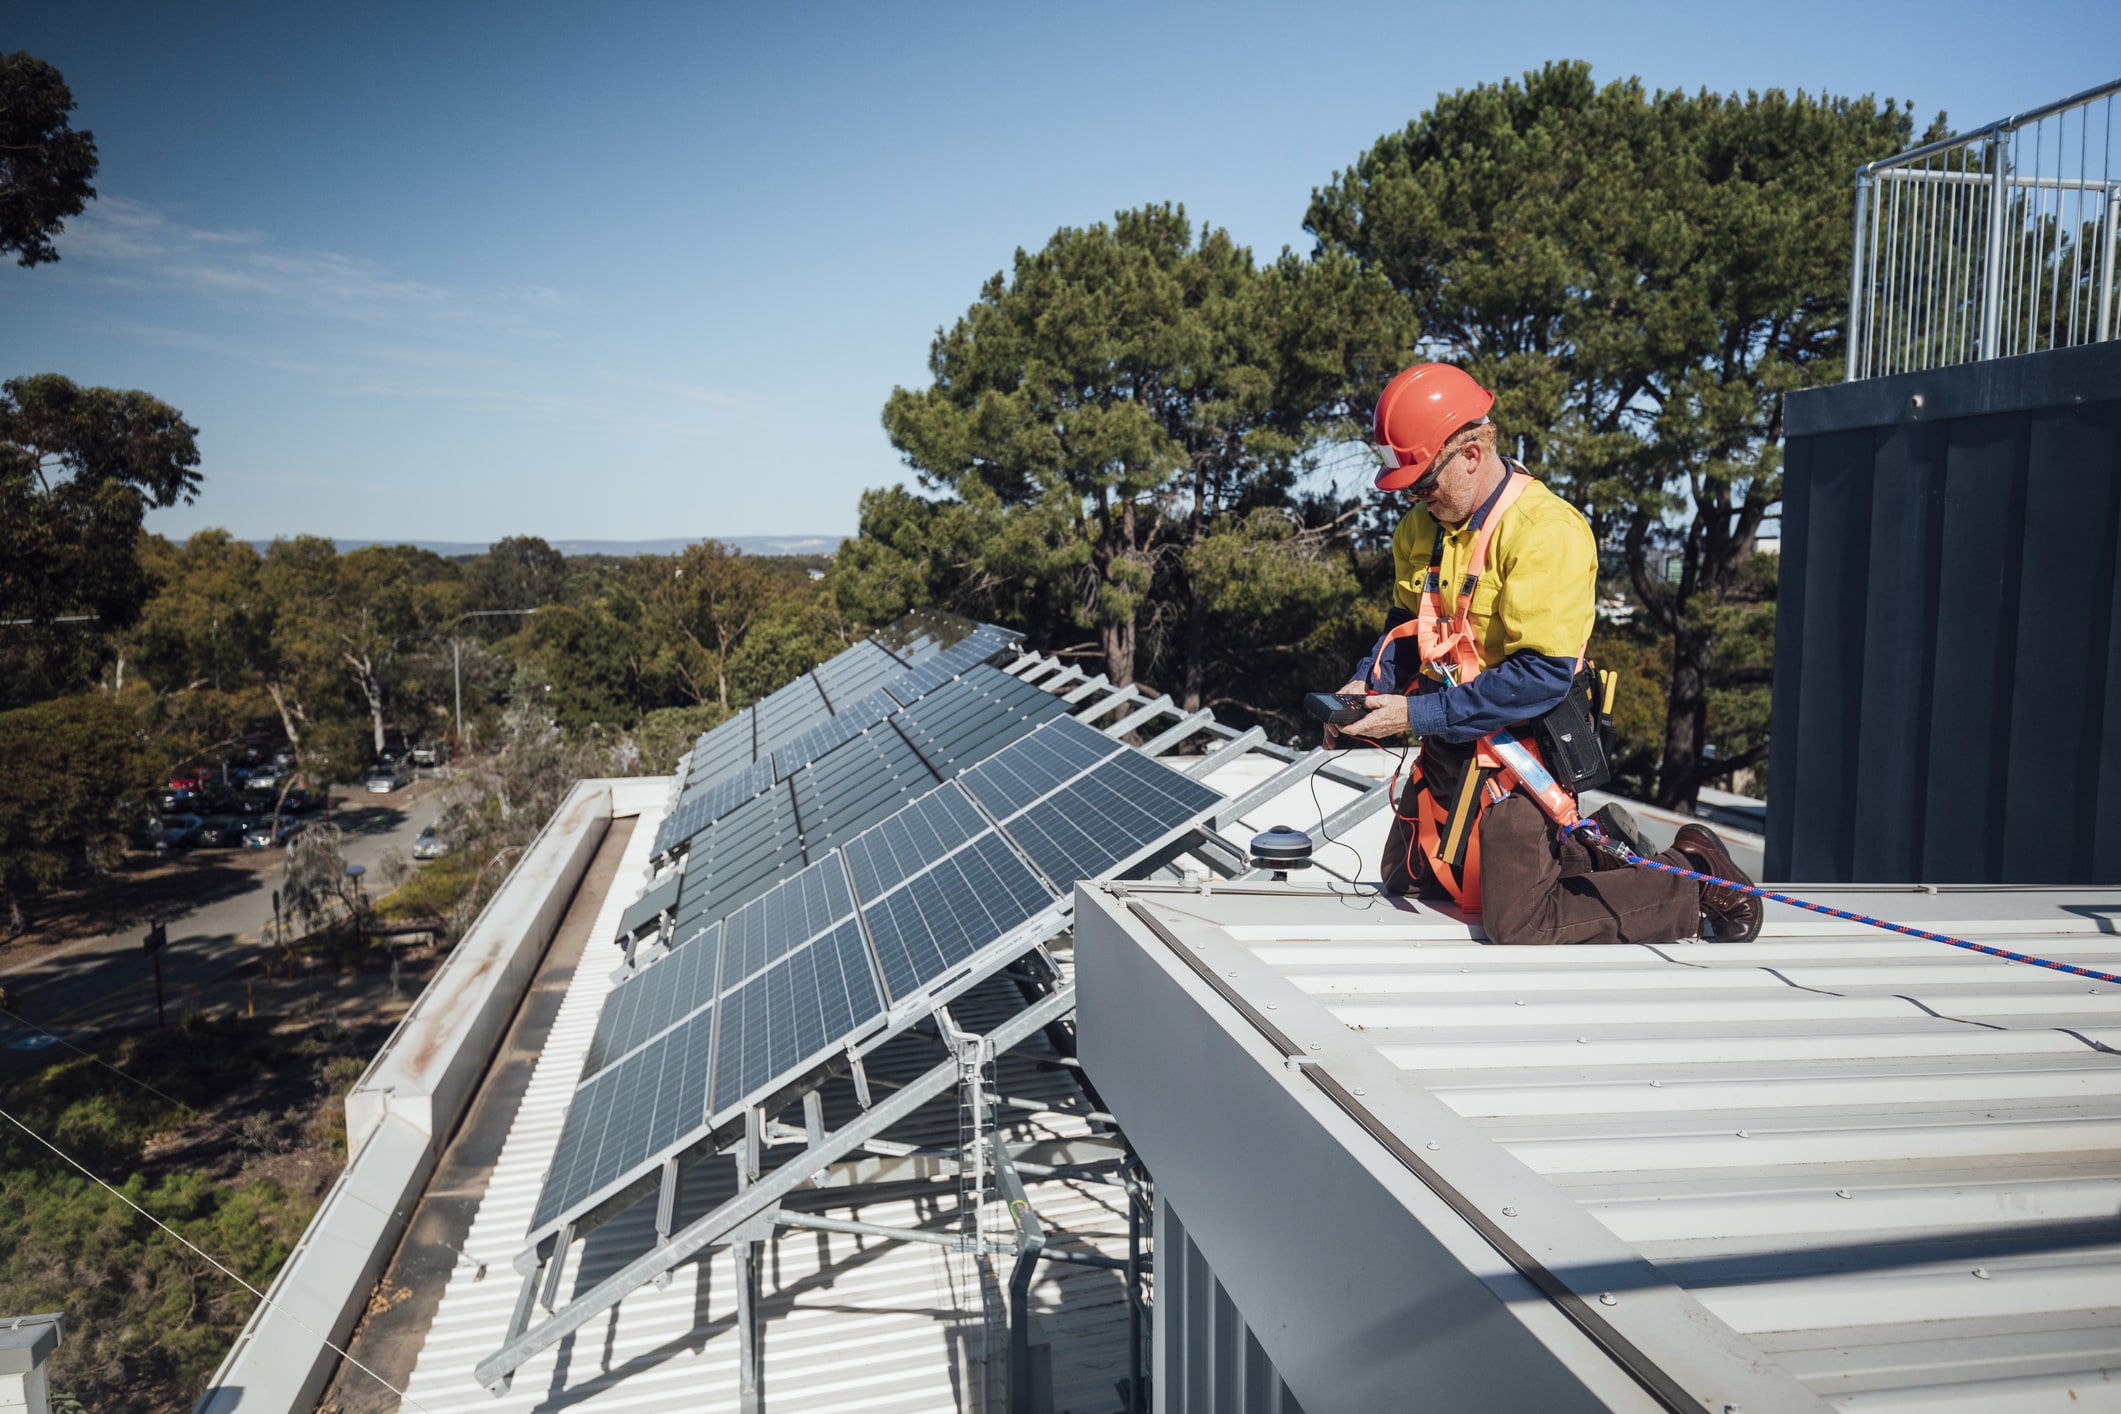 A mature man at work, repairing some solar cell panels on the roof a university. Wearing his overalls, harness and hardhat.